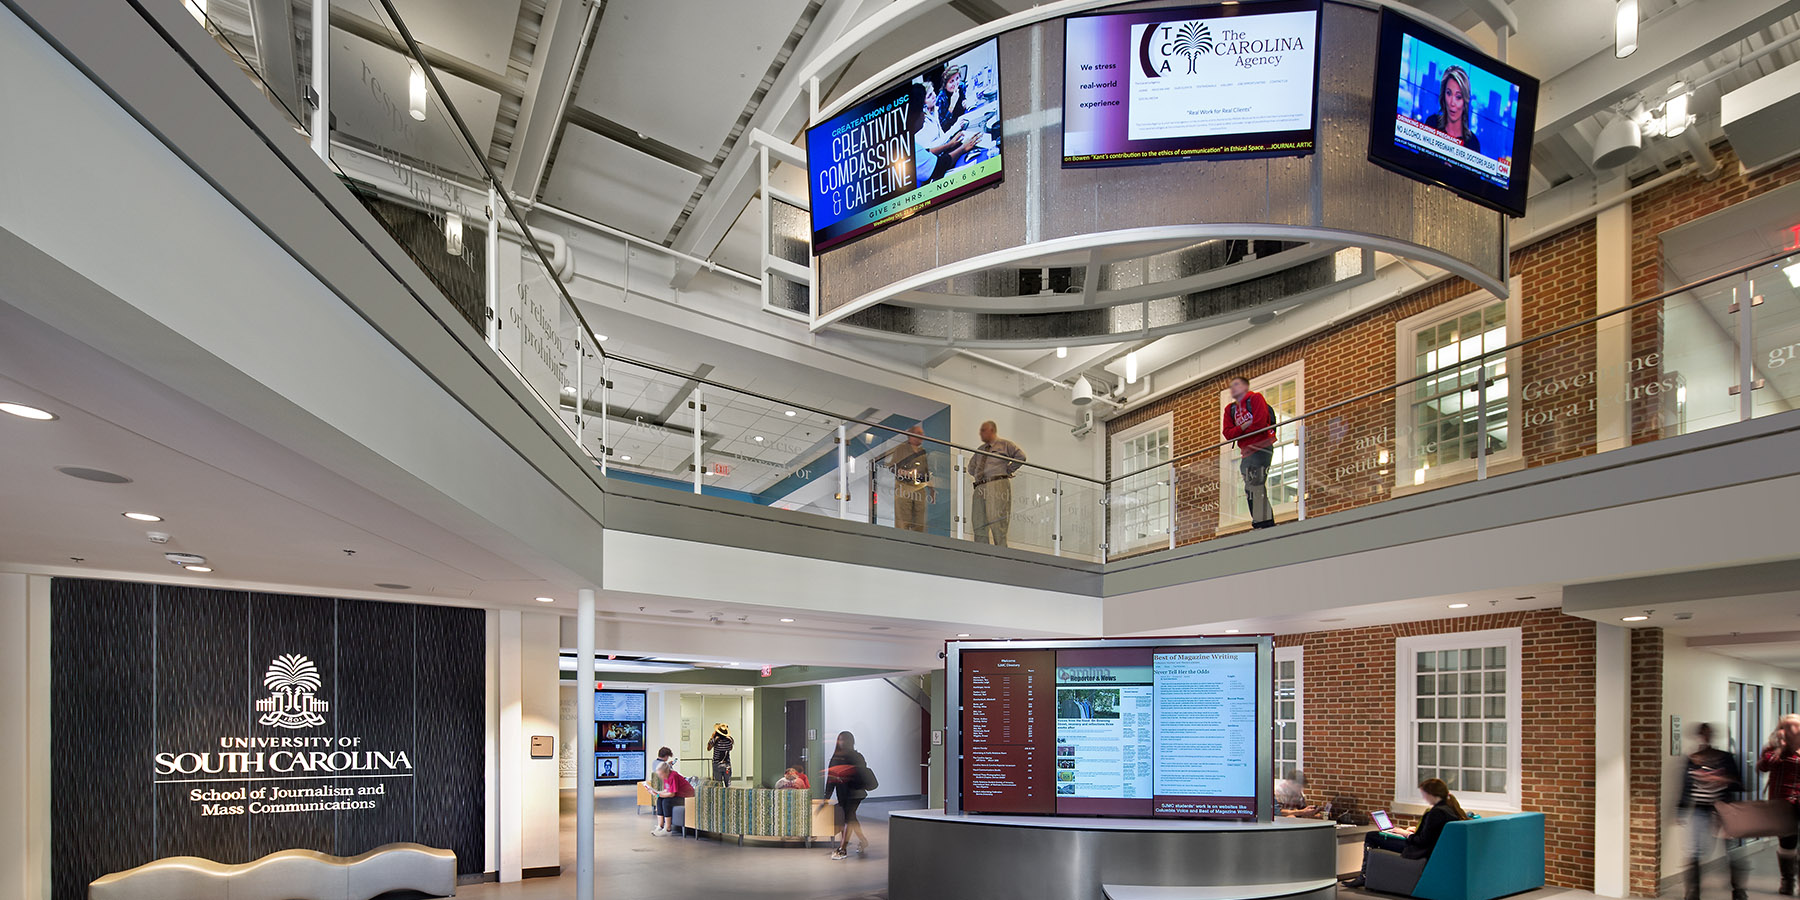 Boudreaux architects and interior designers worked with University of South Carolina on the Journalism Building project.